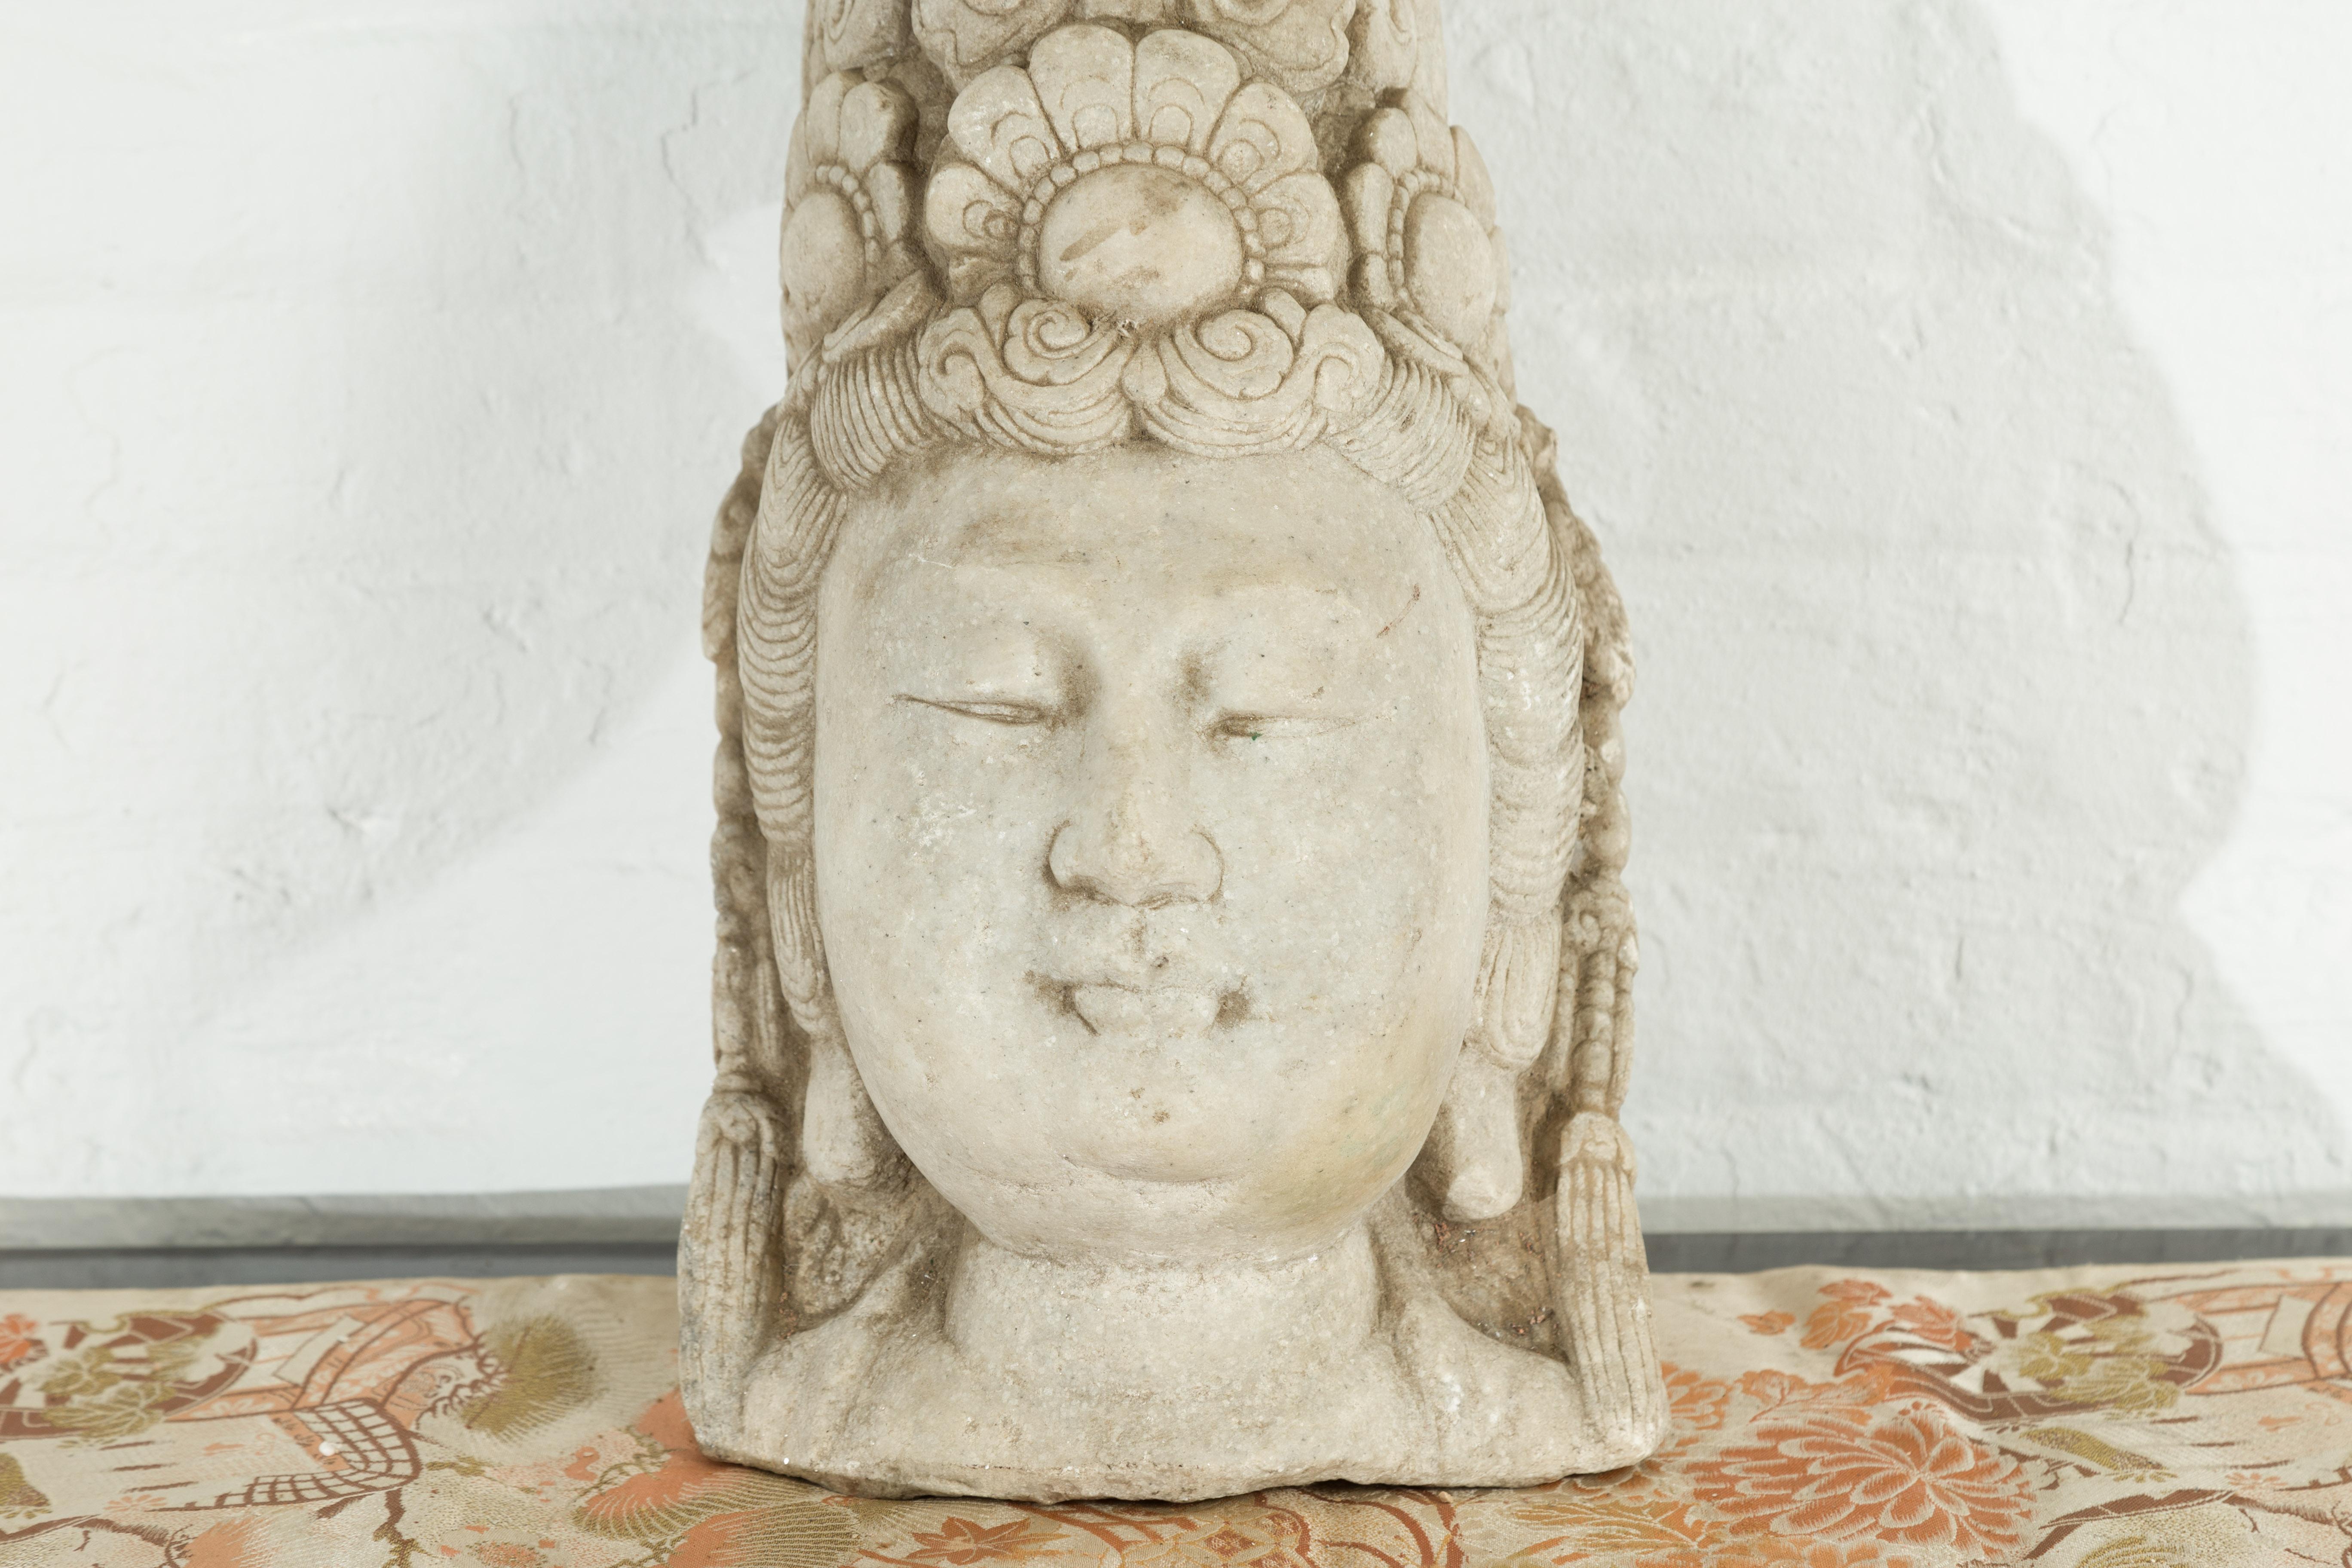 20th Century Vintage Chinese Carved Stone Bust of Guanyin the Bodhisattva of Compassion For Sale